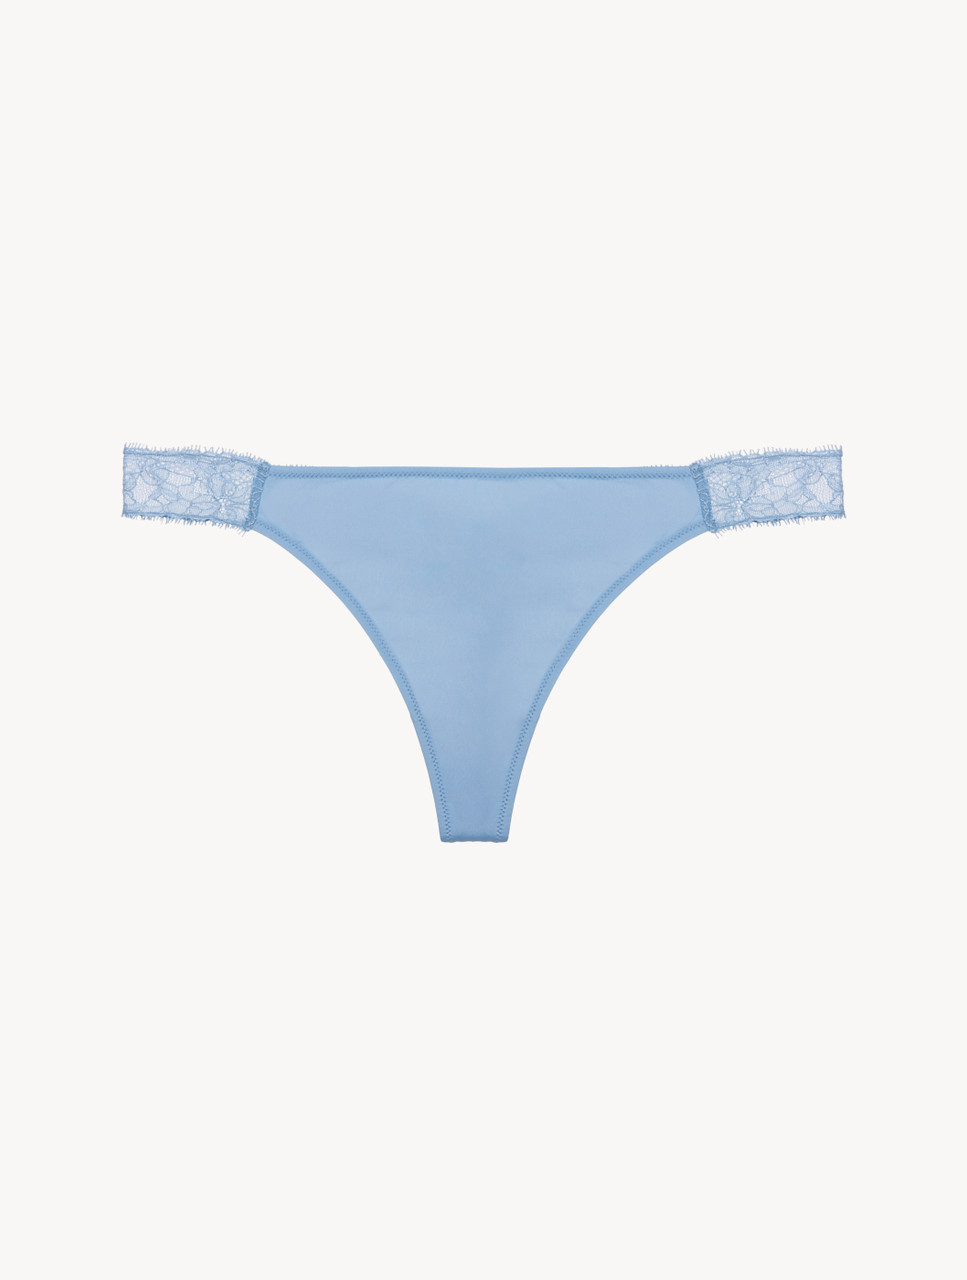 Lace thong in azure